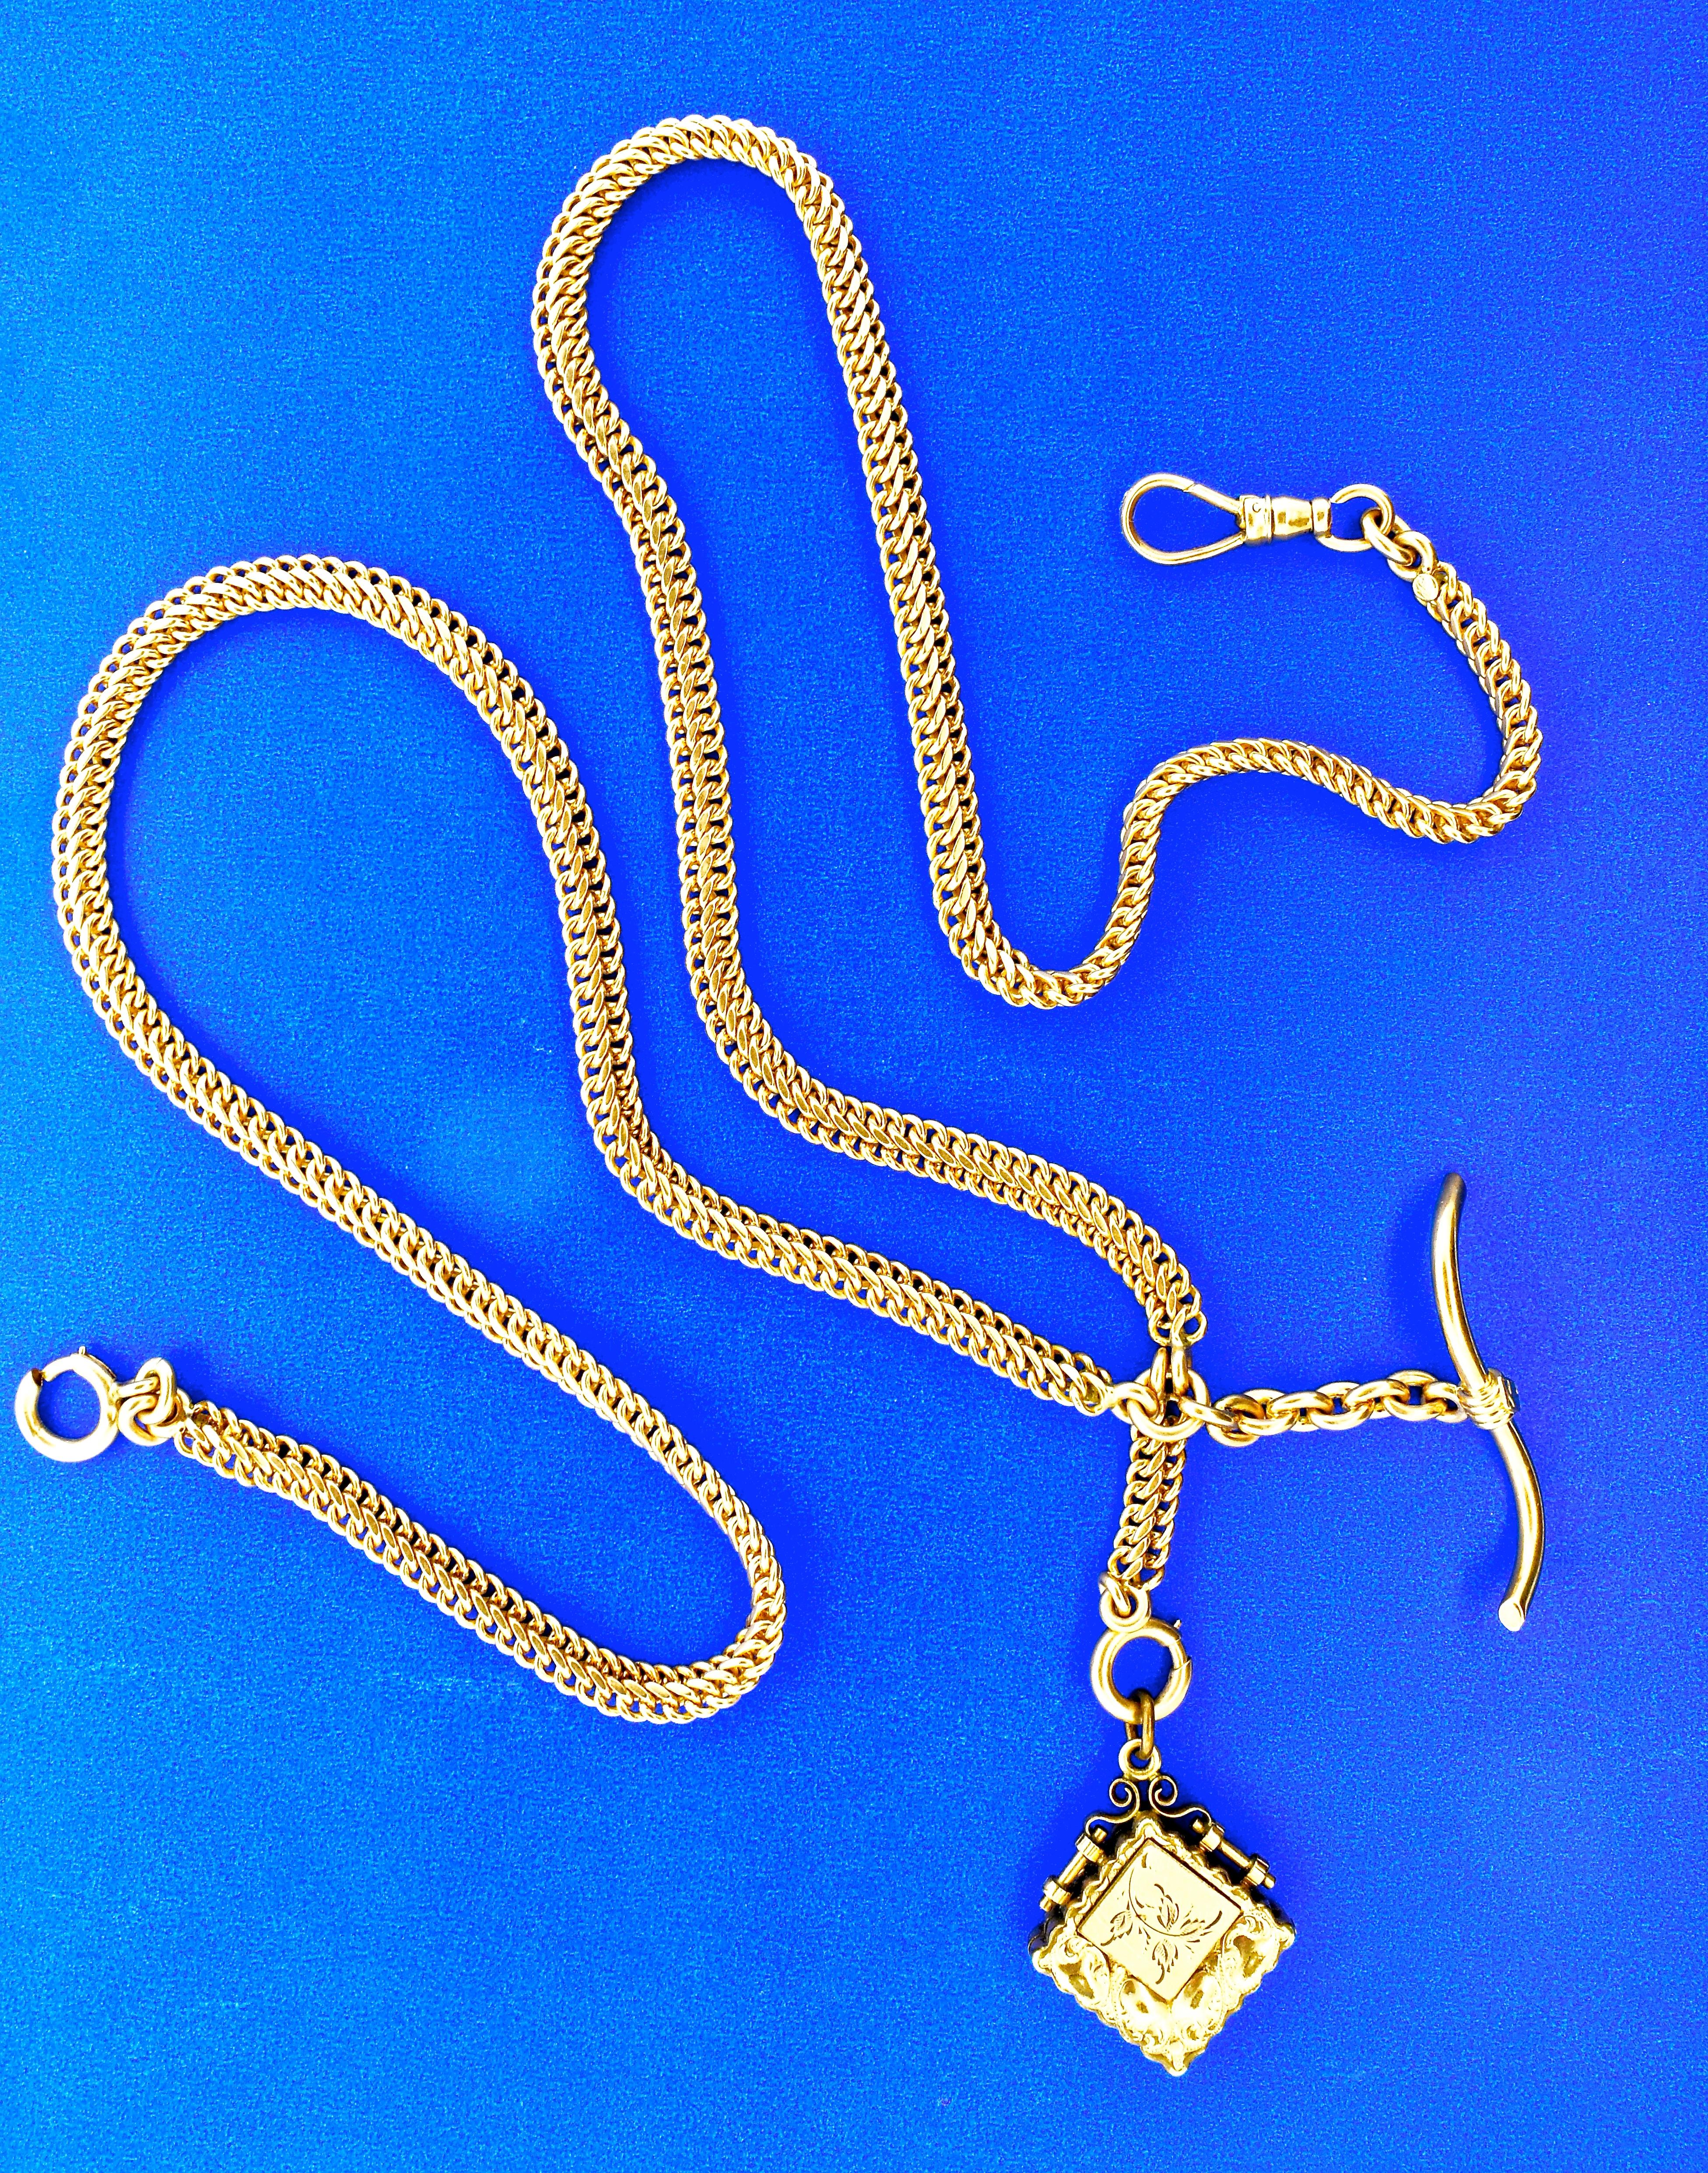 Antique Gold Chain with Fobs, circa 1900 1